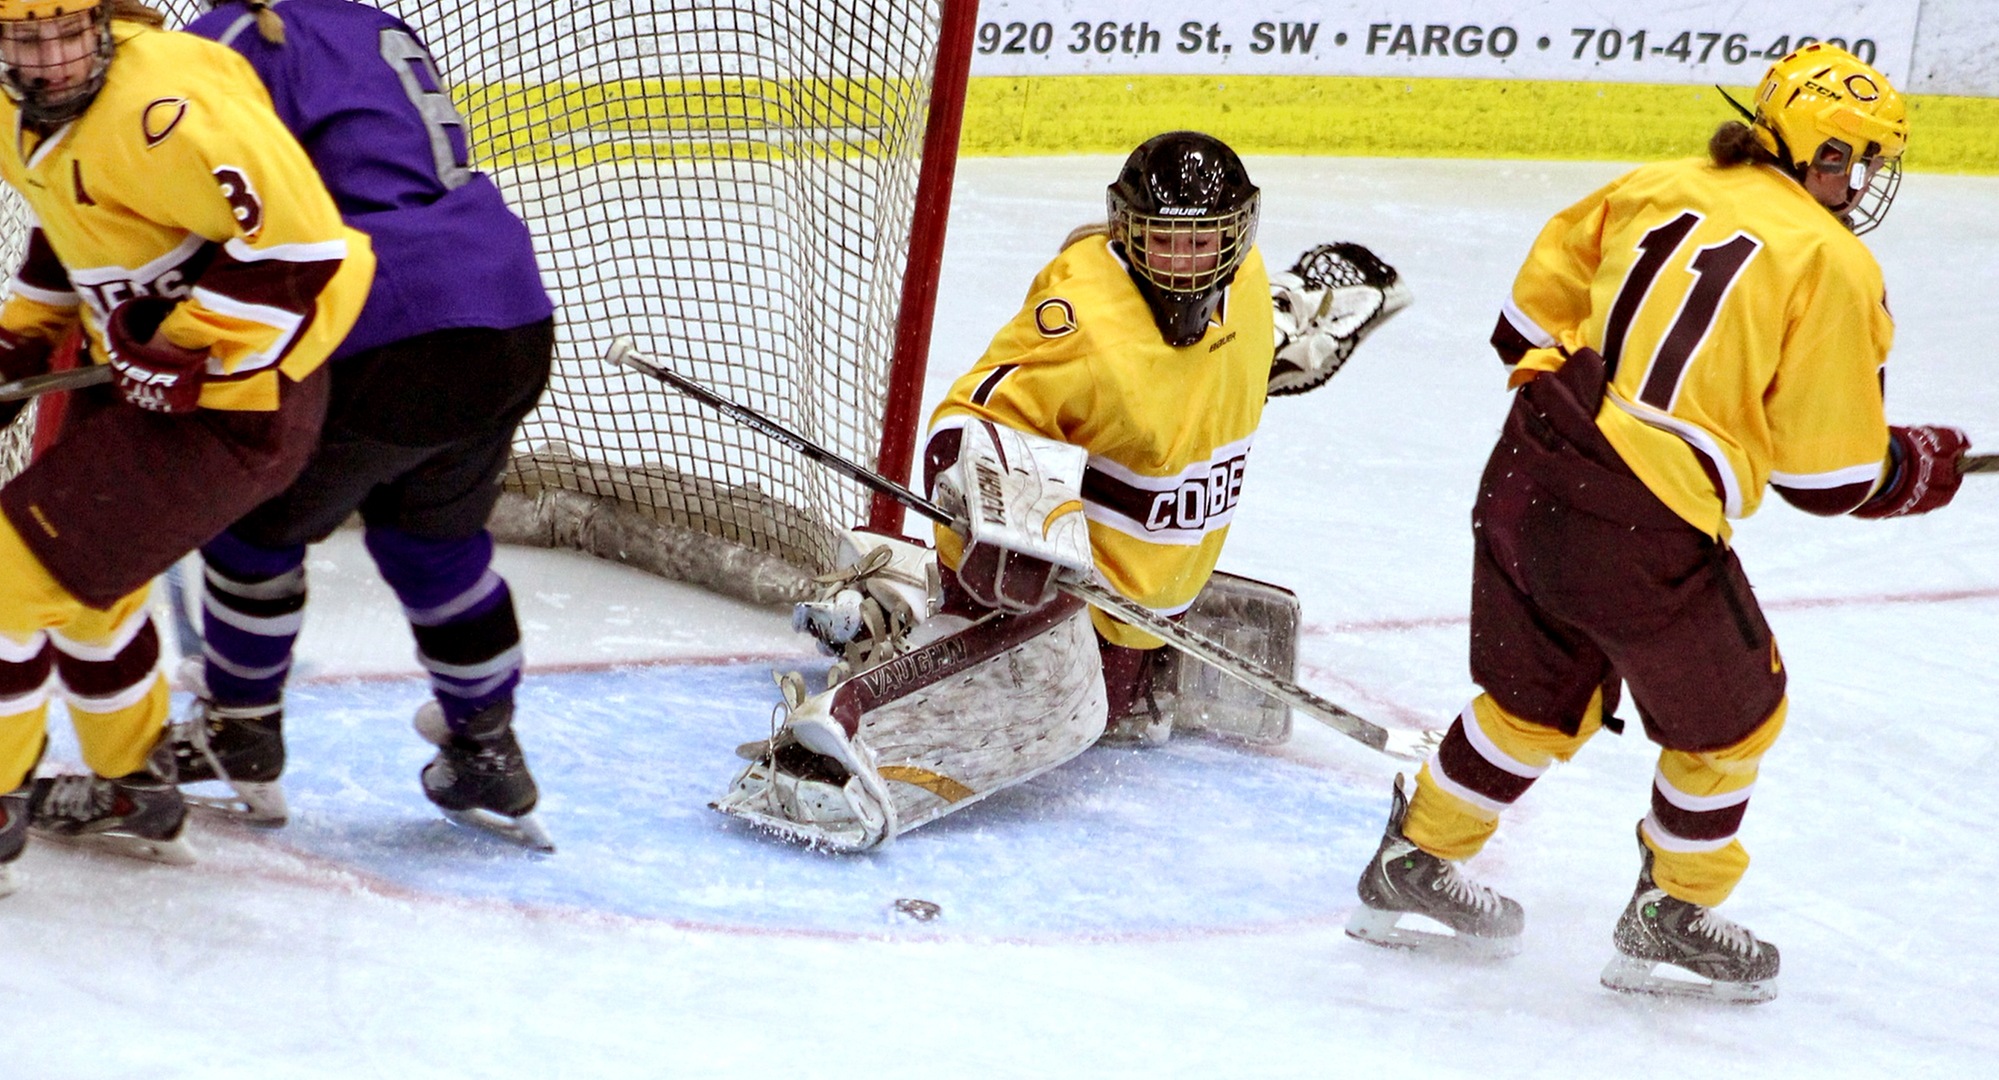 Senior goalie Andrea Klug makes one of her 35 saves in the Cobbers' game with St. Thomas. Klug now has 491 saves on the year which is second most in all of Division III.